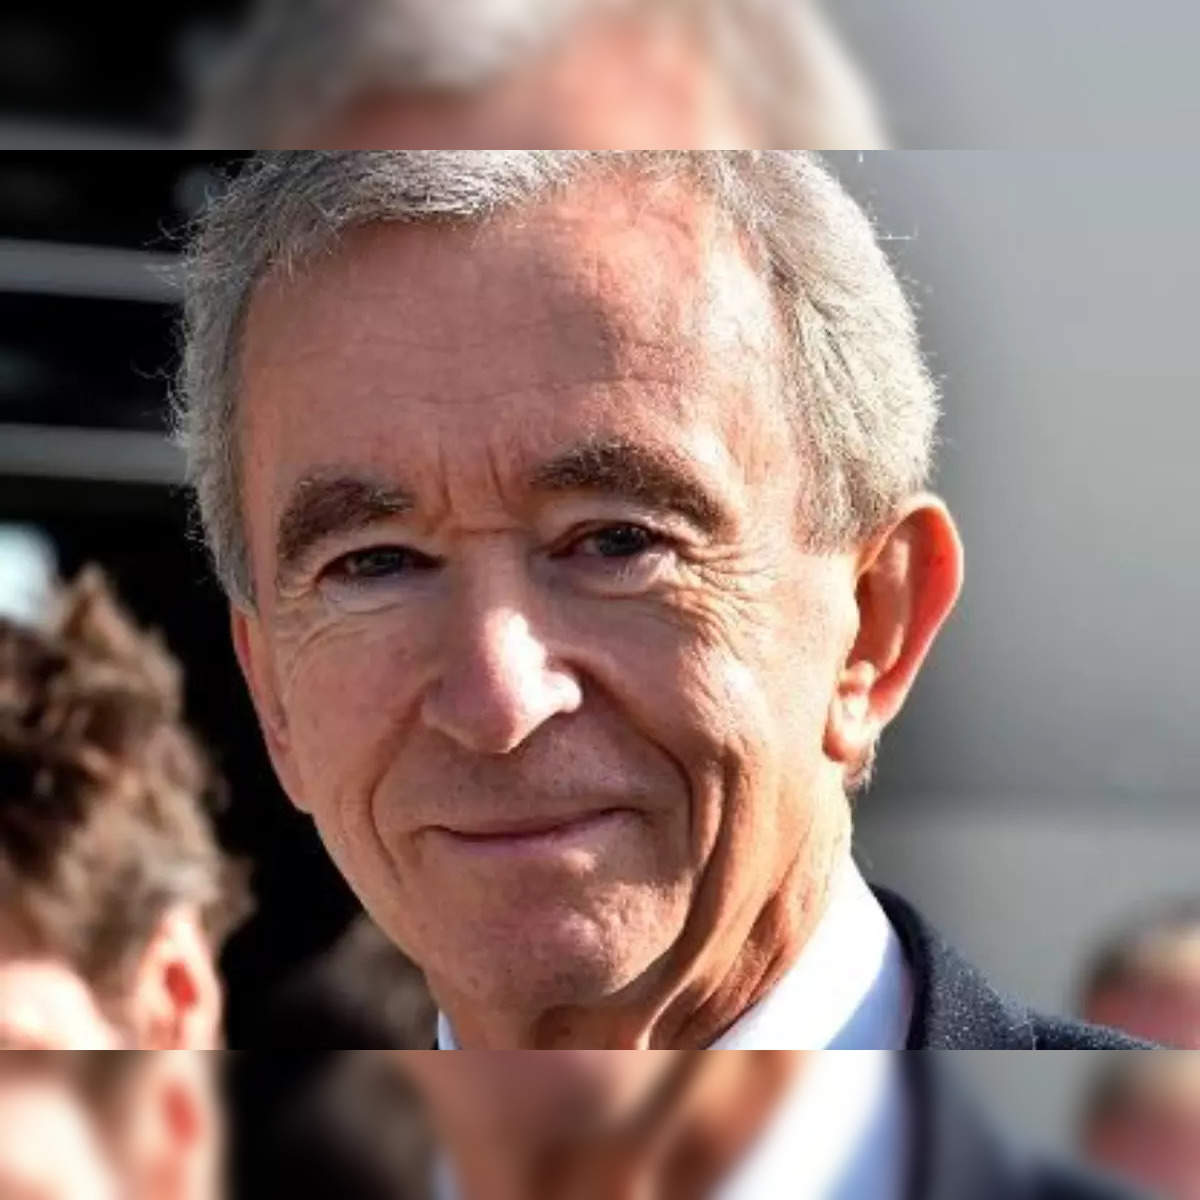 LVMH chairman Bernard Arnault promoted his son and daughter to the position  of the owner of